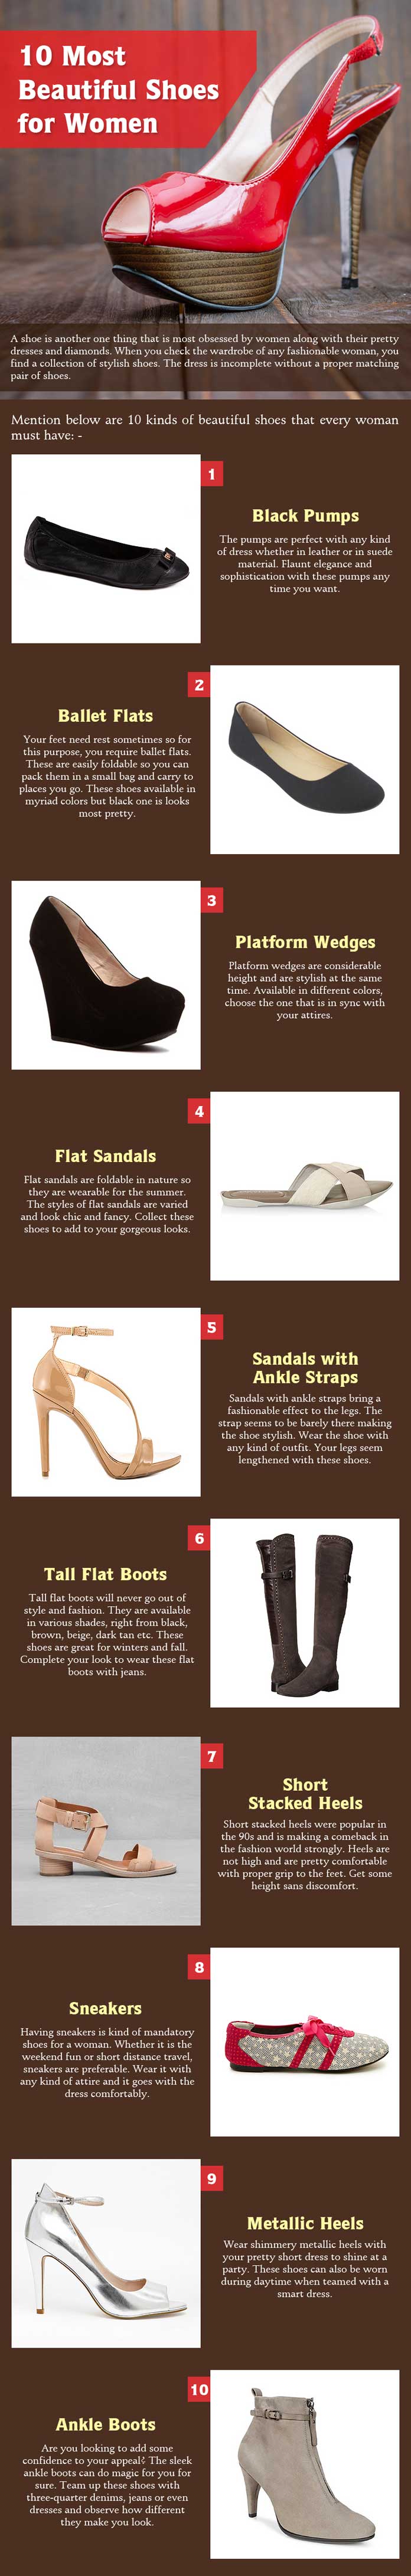 10 Most Beautiful Shoes for Women [Infographic]